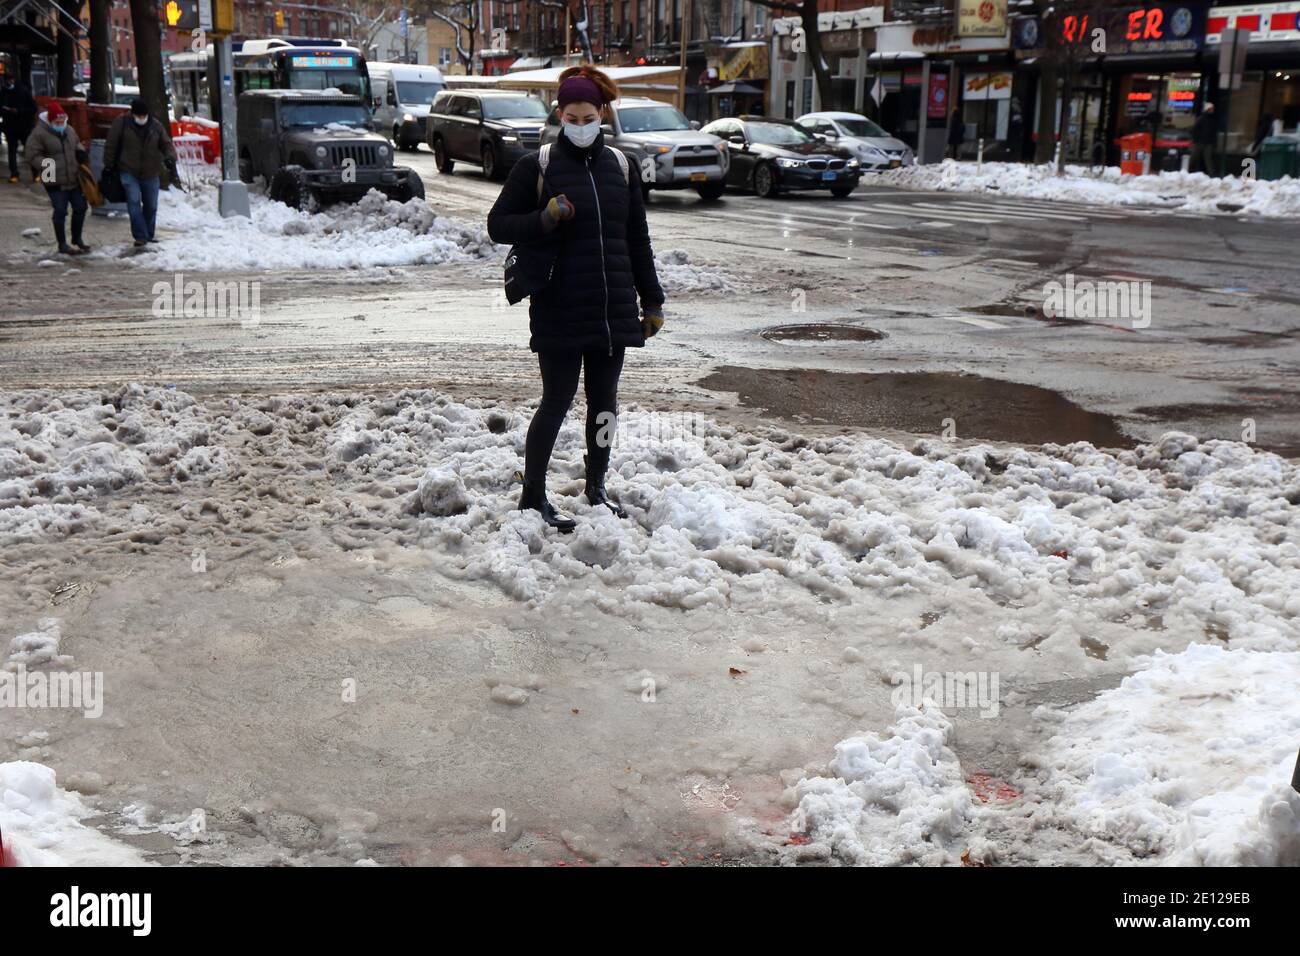 A person contemplates how to cross an ankle-deep puddle of dirty slush water at a crosswalk in New York, NY. Stock Photo